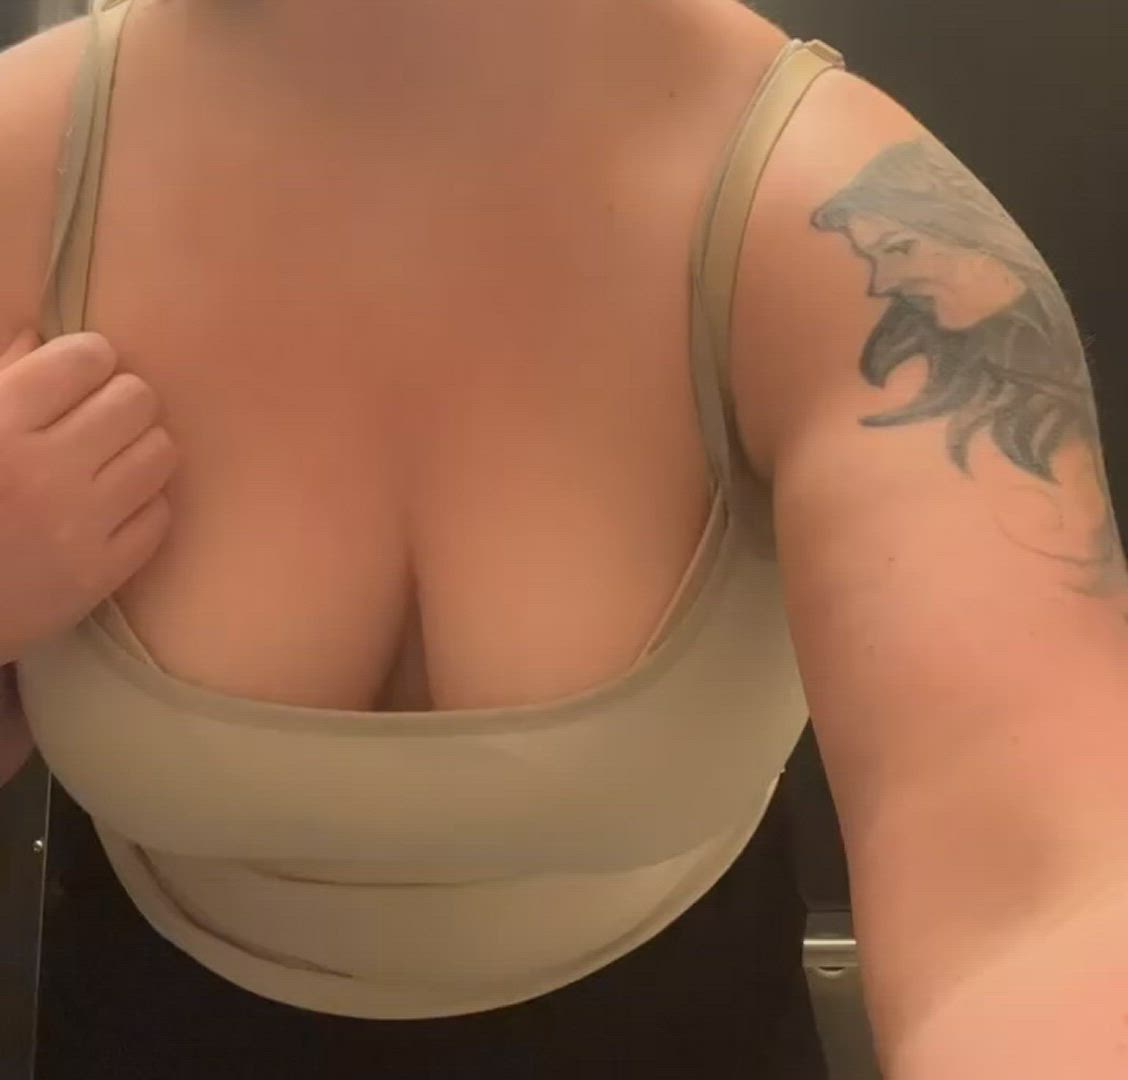 Tits porn video with onlyfans model customizedfetish <strong>@madebyhope</strong>